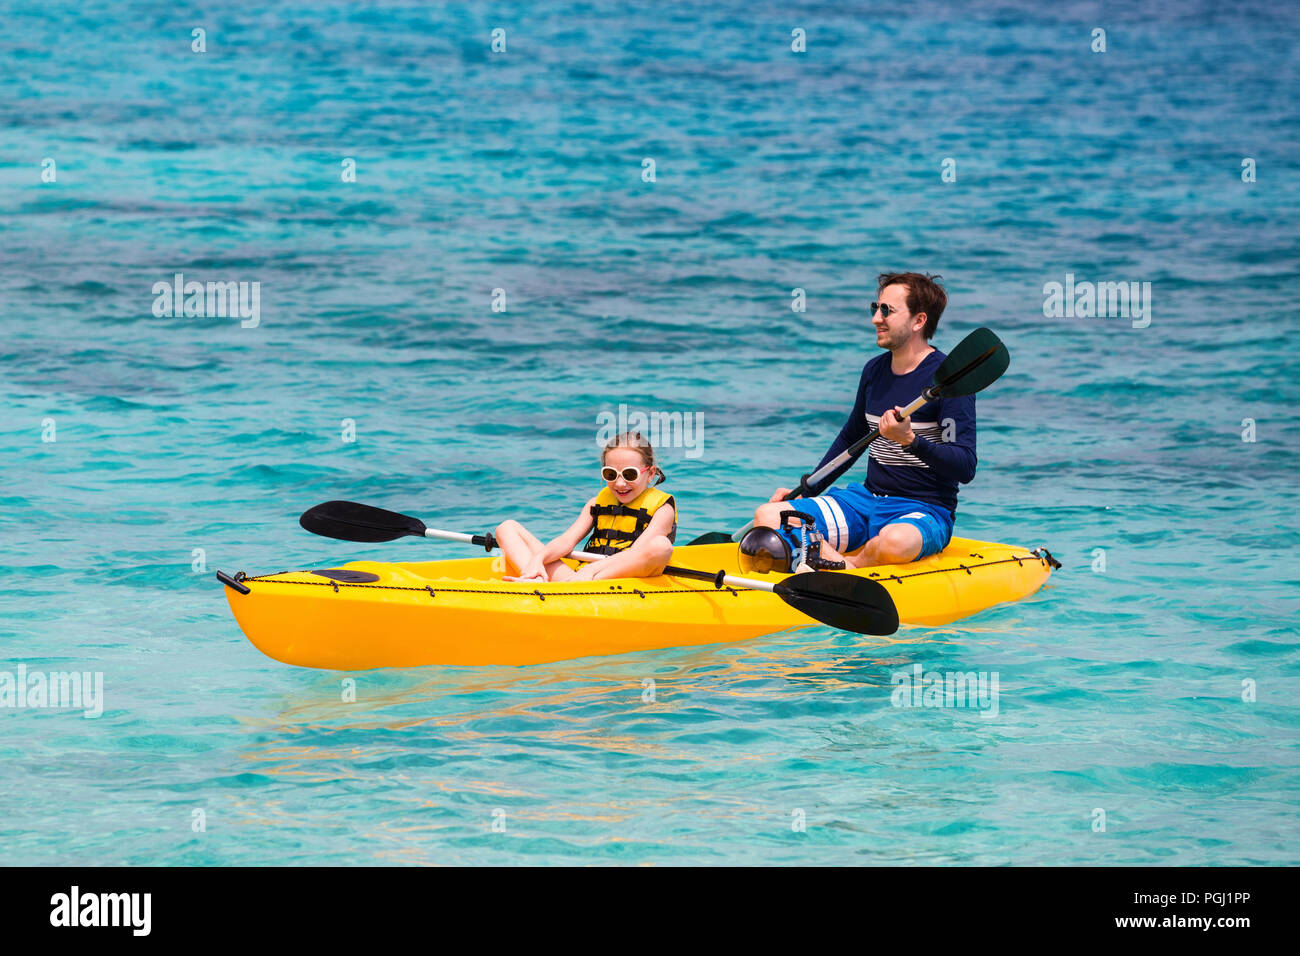 Family of father and daughter paddling on colorful yellow kayaks at tropical ocean water during summer vacation Stock Photo